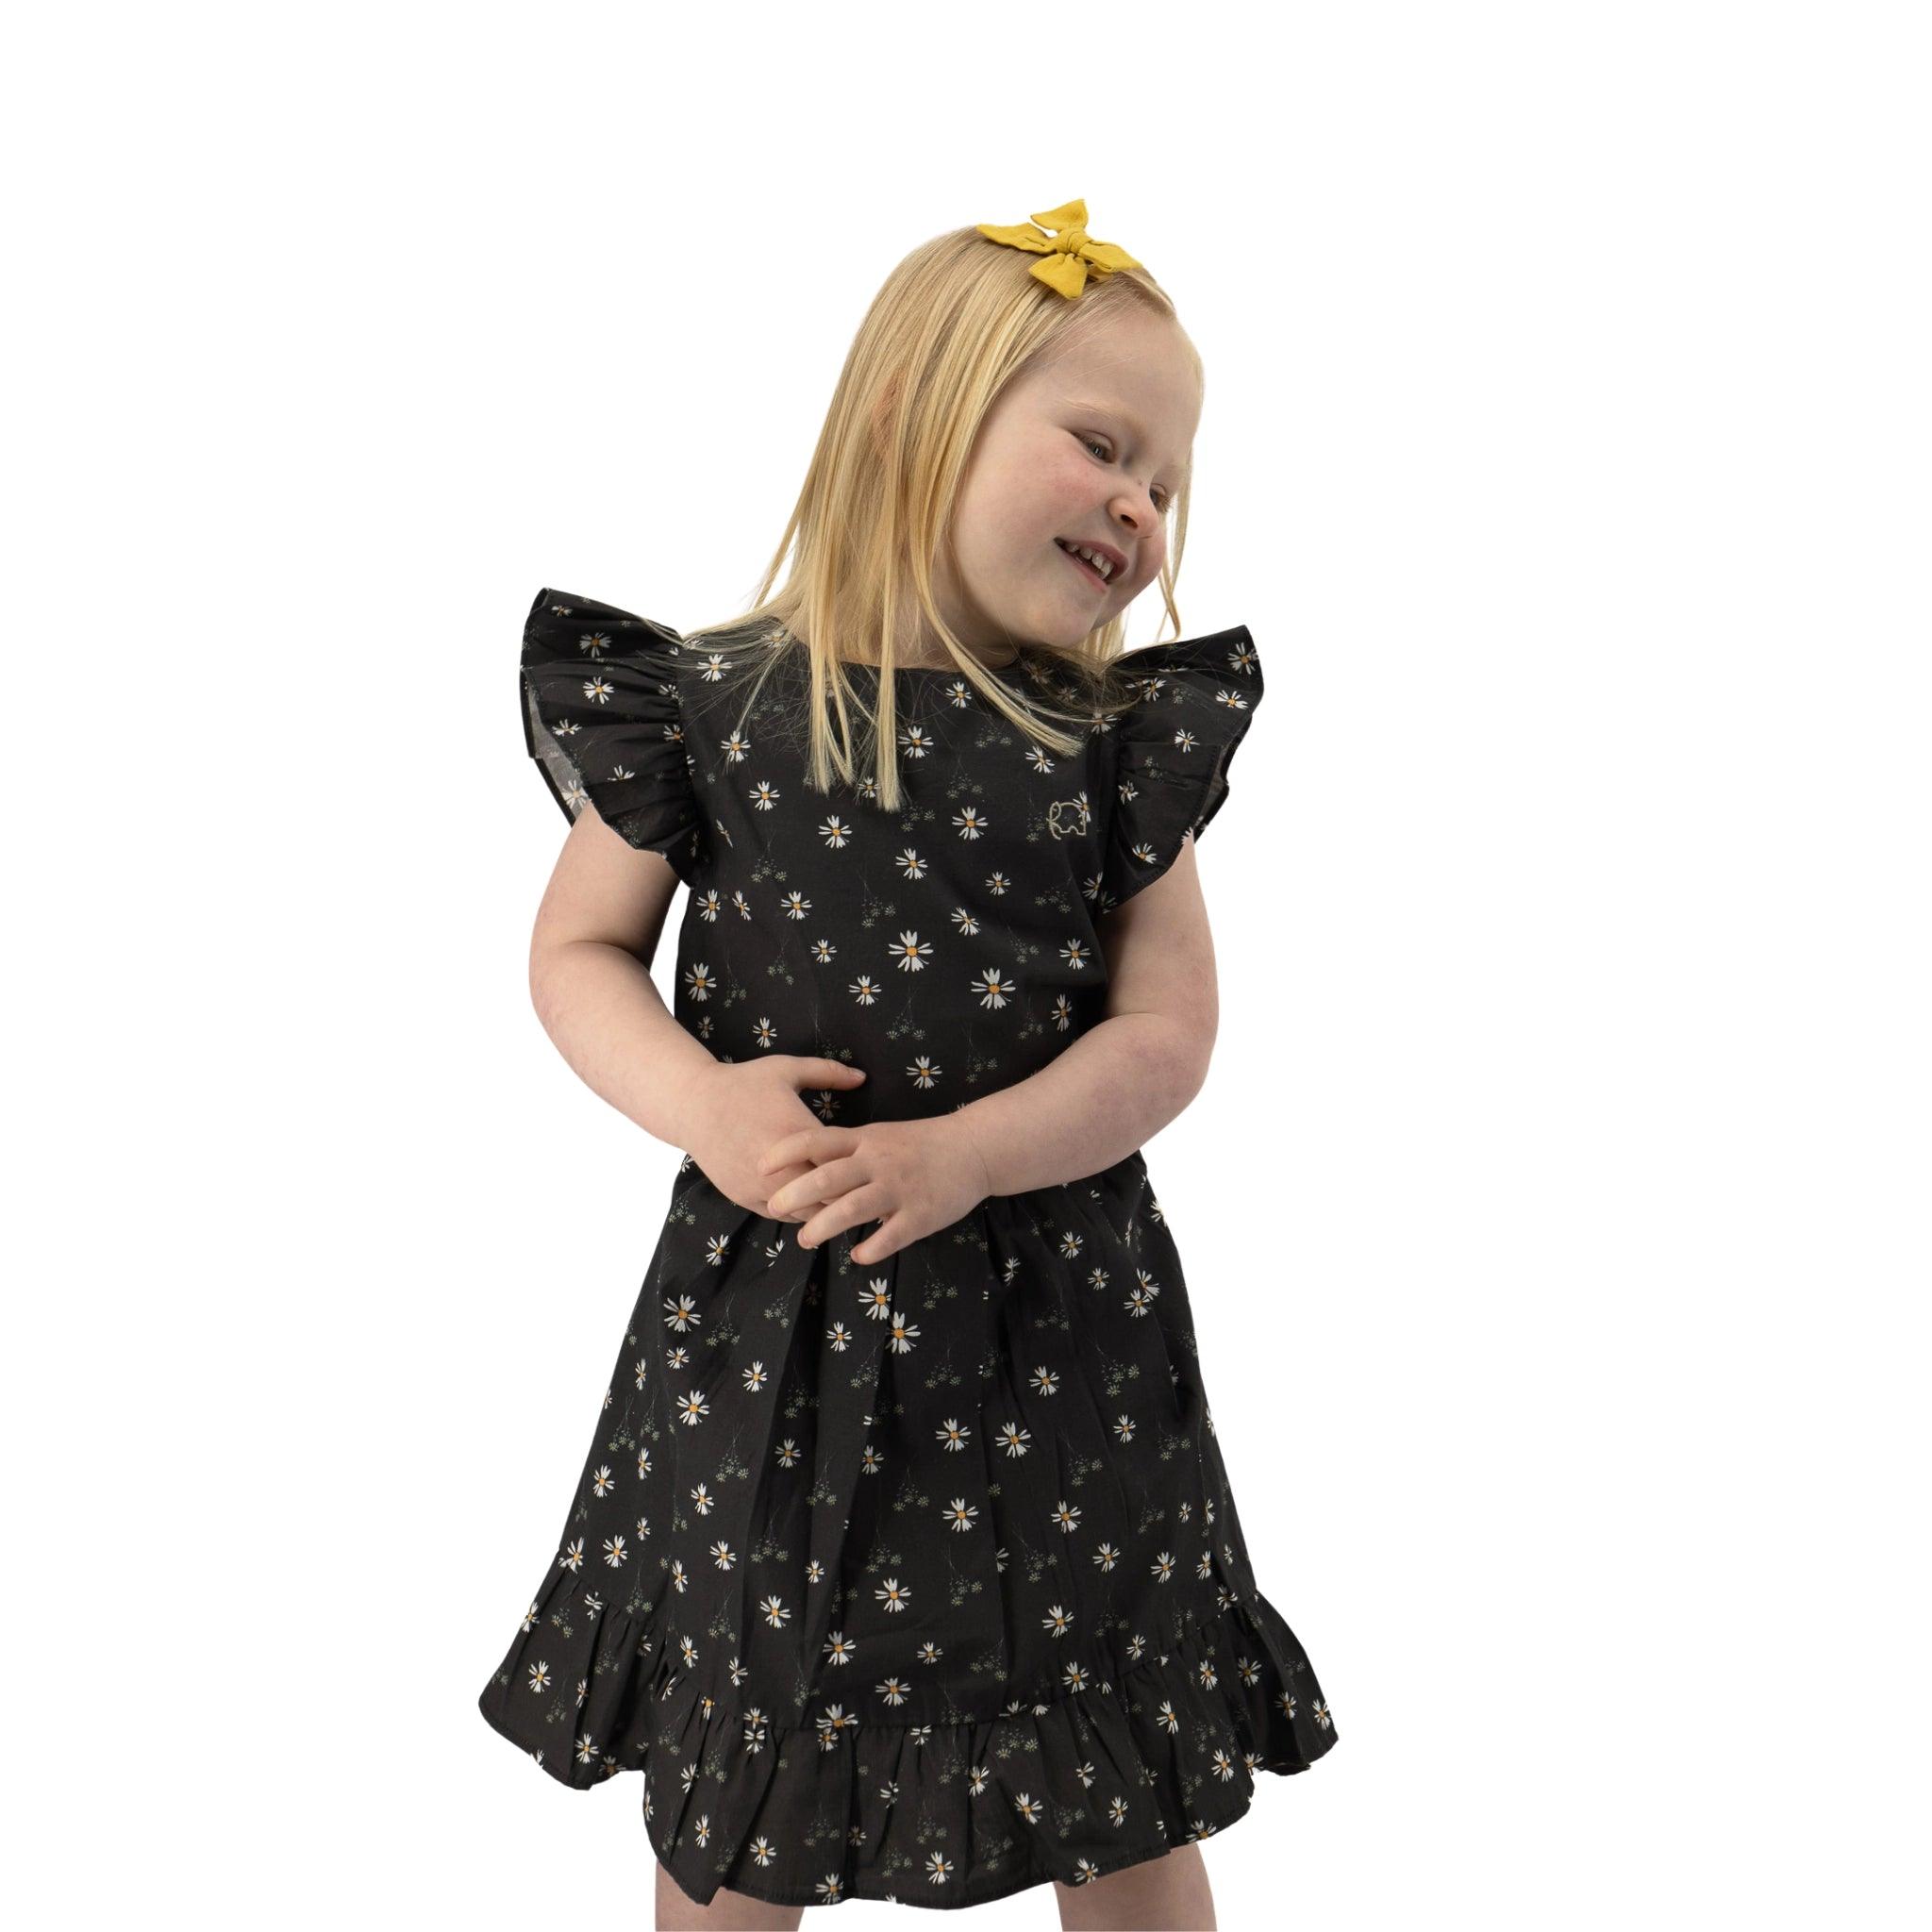 A young girl with a yellow hair bow and a Karee Petite Blossom Black Cotton Dress smiling and looking to her right, standing against a white background.